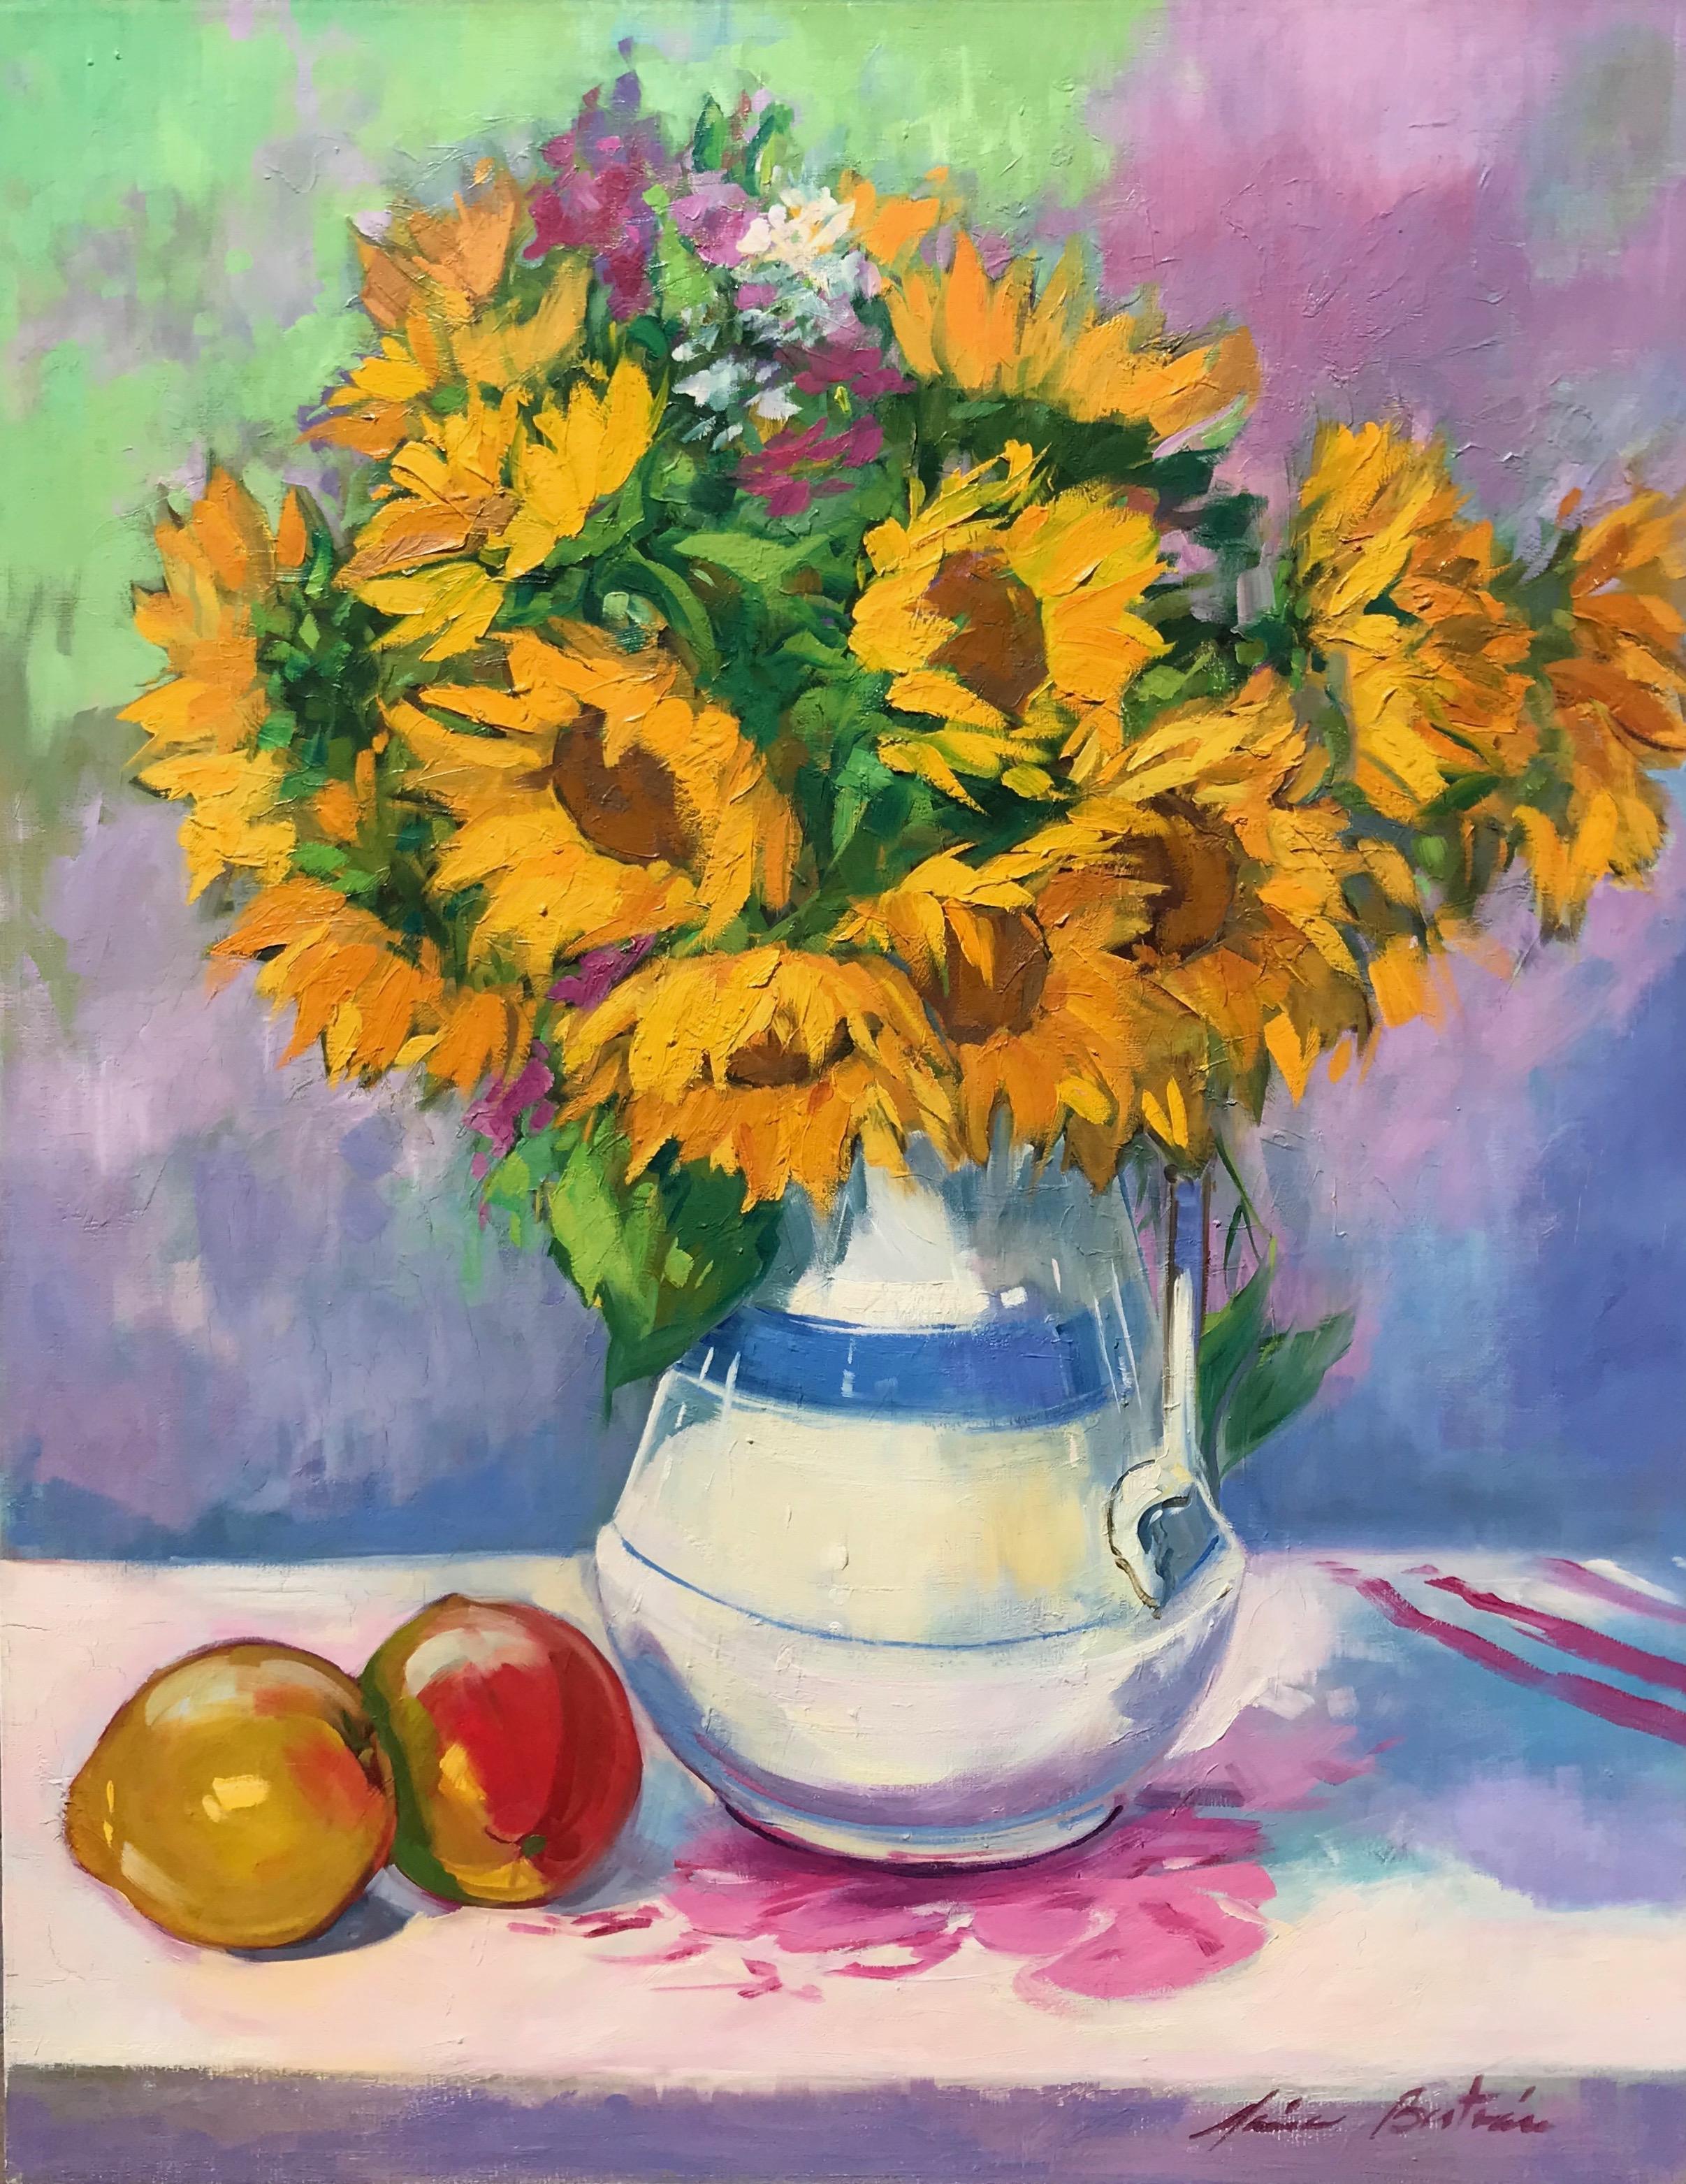 Maria Bertrán Still-Life Painting - "Sunflowers In White Vase" Contemporary Impressionist Still Life Oil